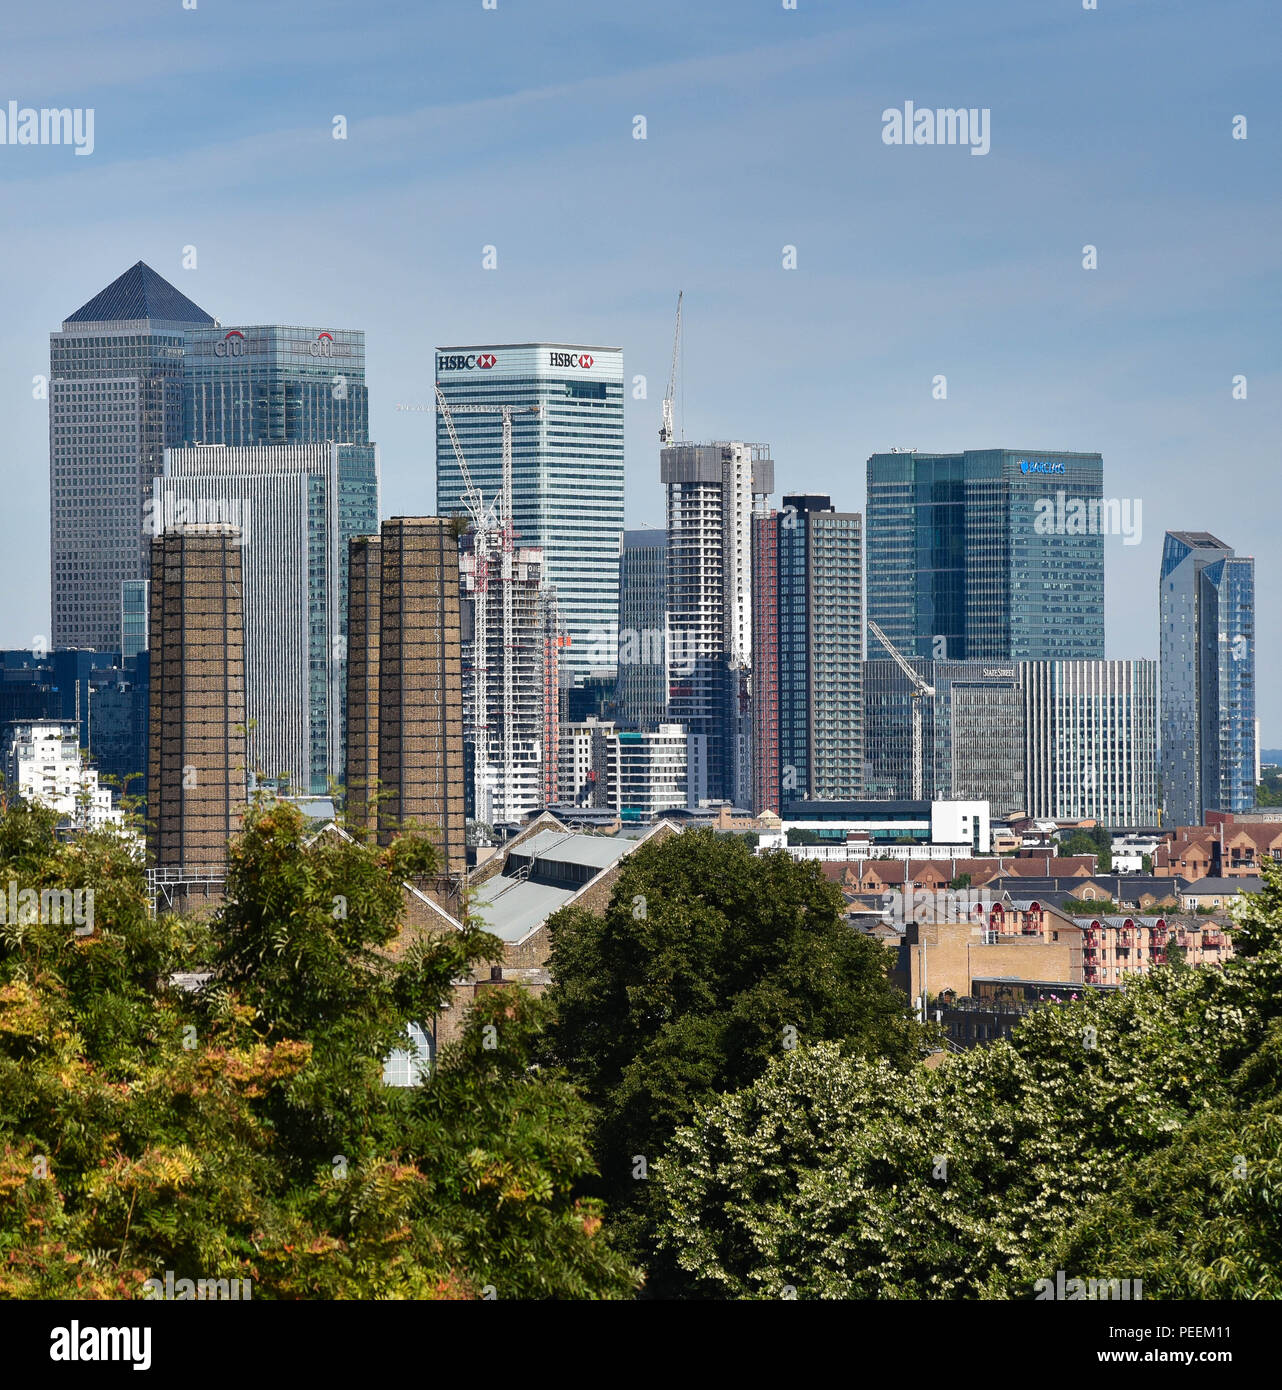 a view of the banking sector canary wharf, london Stock Photo